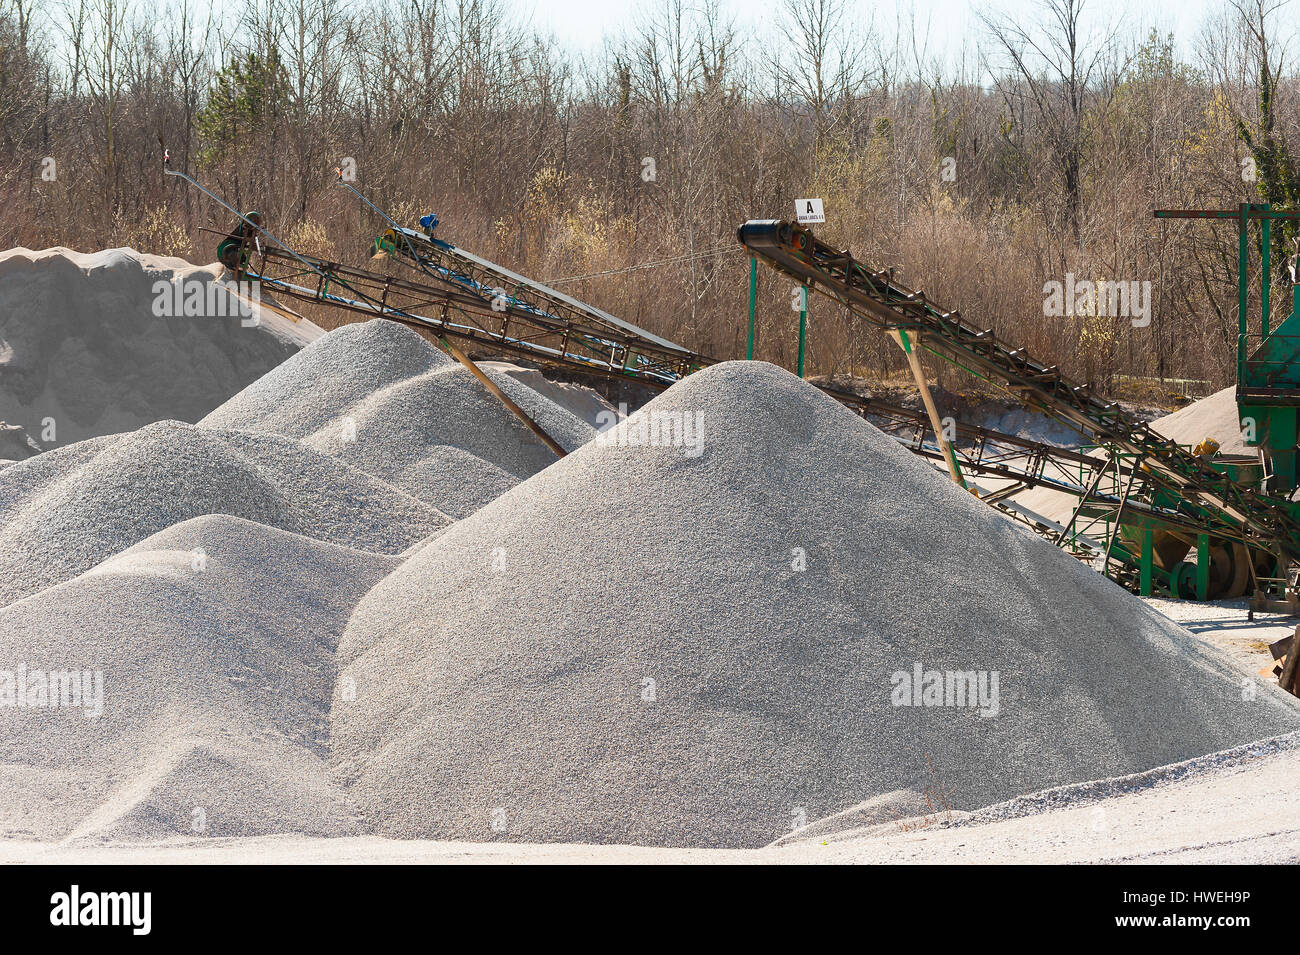 Extraction gravel. Machinery distribution and classification by size gravel. Conveyors for transporting gravel.Gravel quarry. Construction industry. Stock Photo